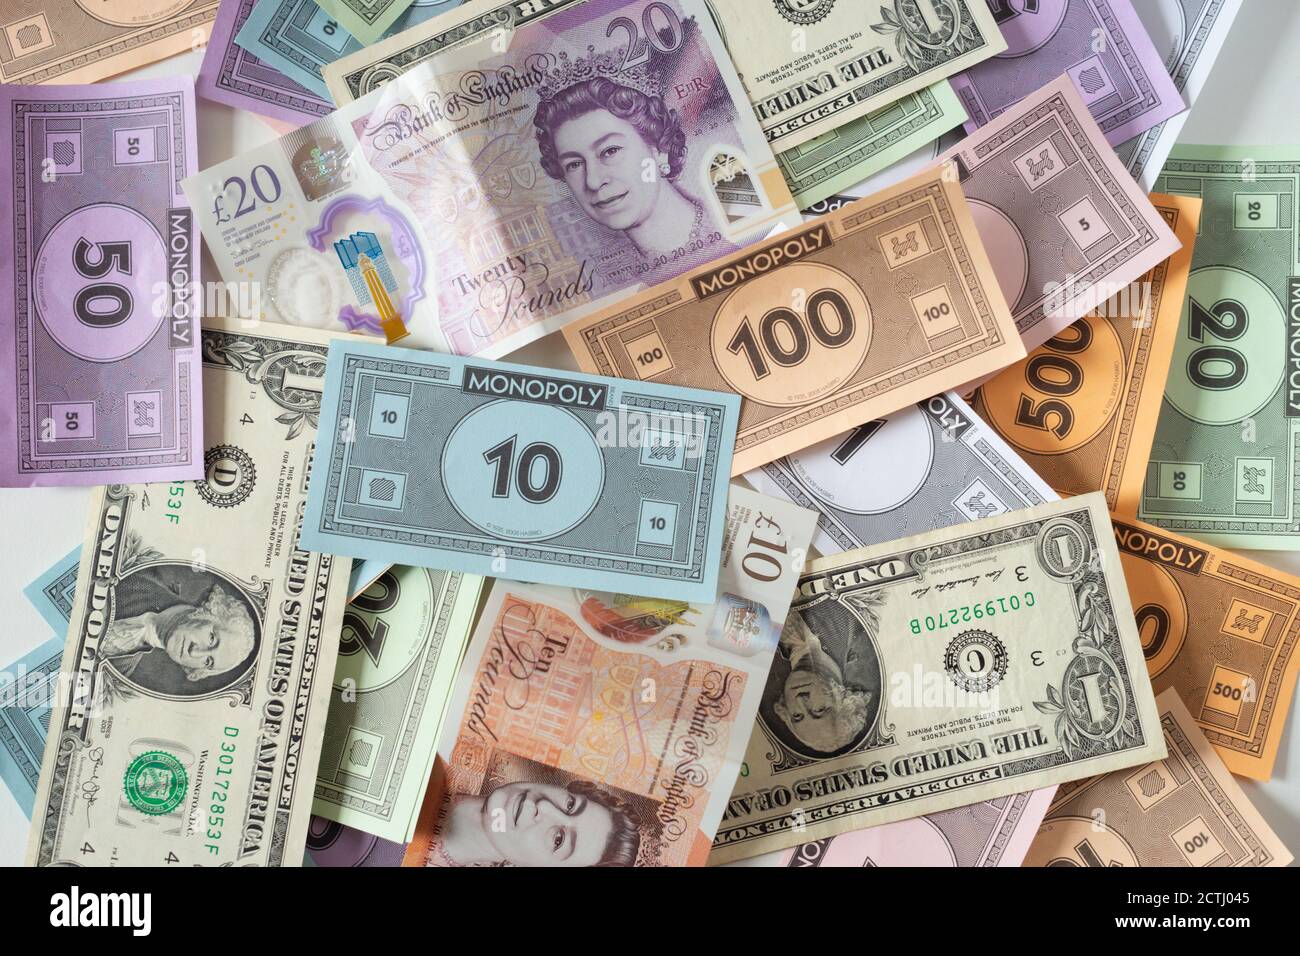 Banknotes in amongst monopoly money, a metaphor for inflation, debt, diminishing value, interest rates, lack of purchasing power, weak currency Stock Photo